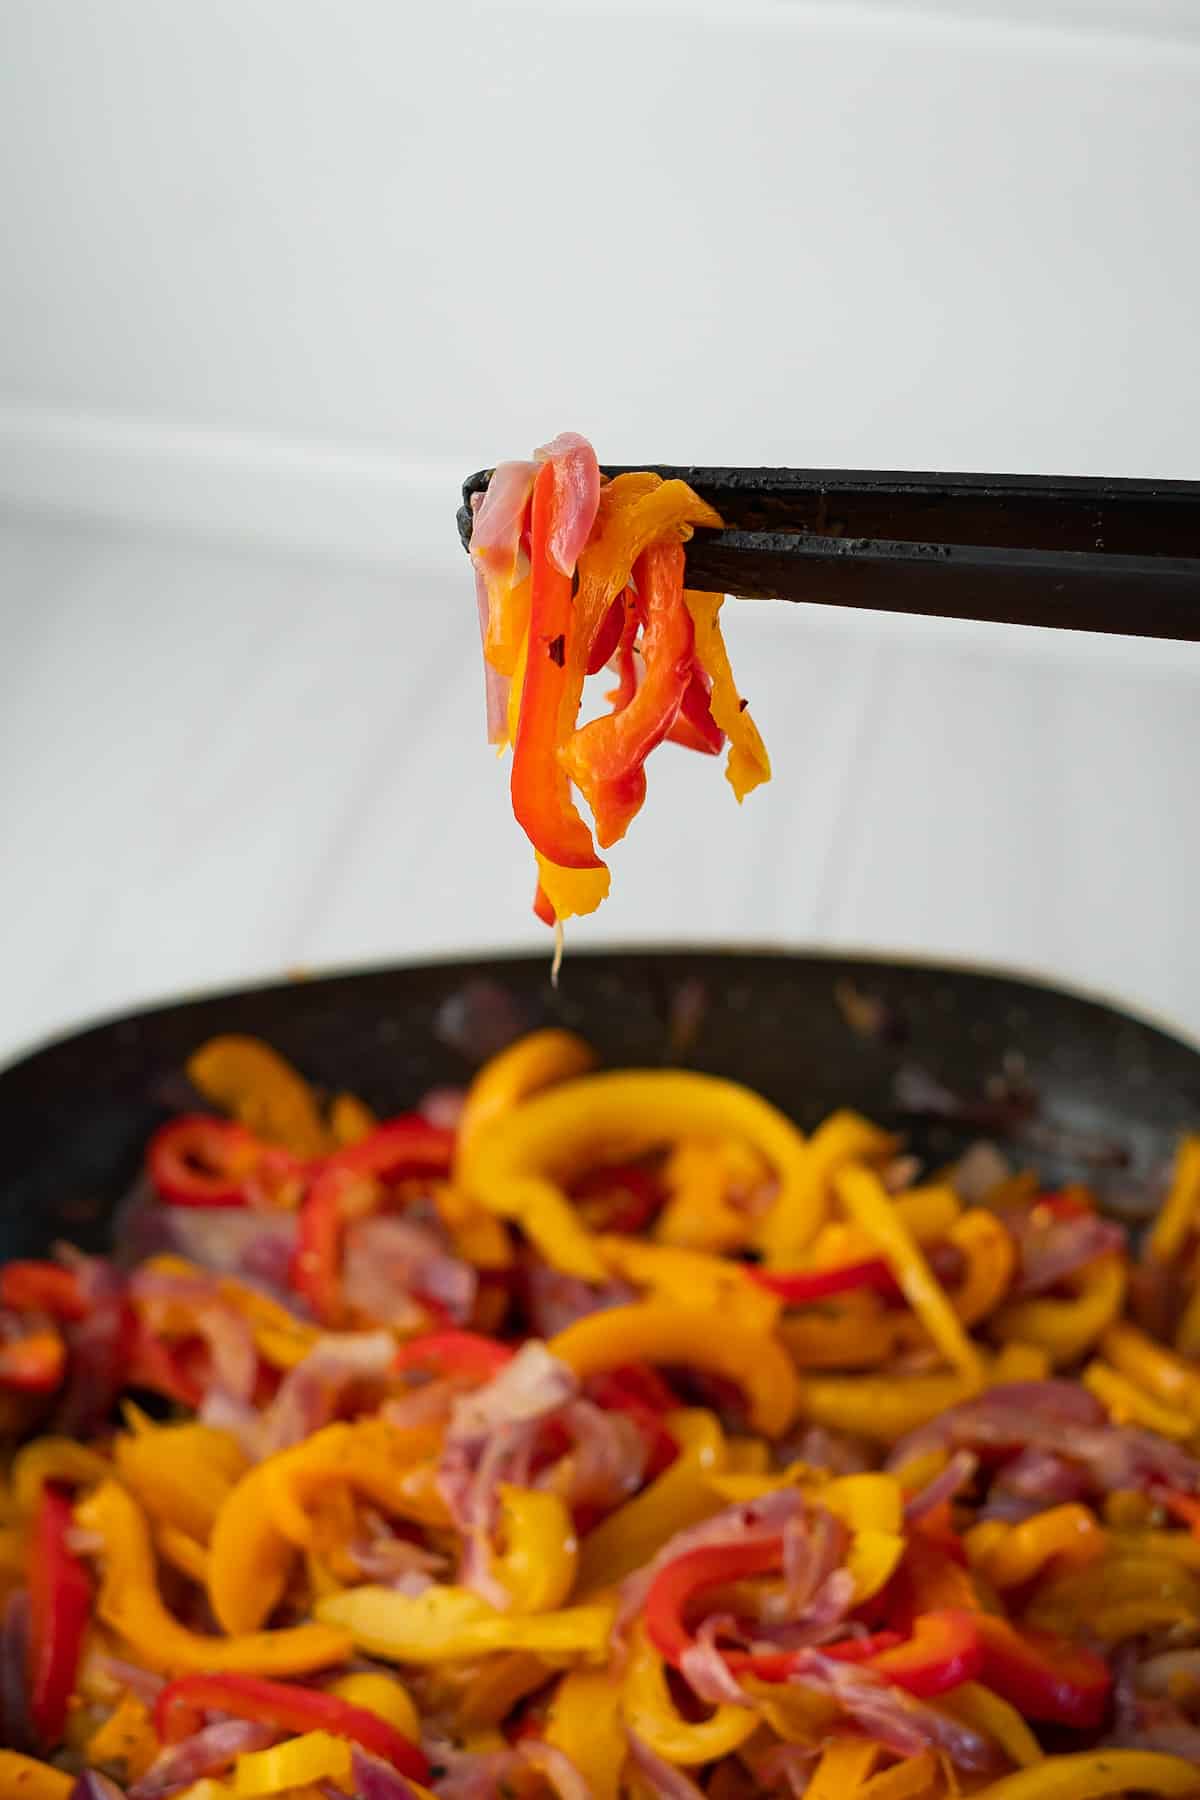 Tongs holding up several sauteed onions and peppers to show the soft, caramelized texture.